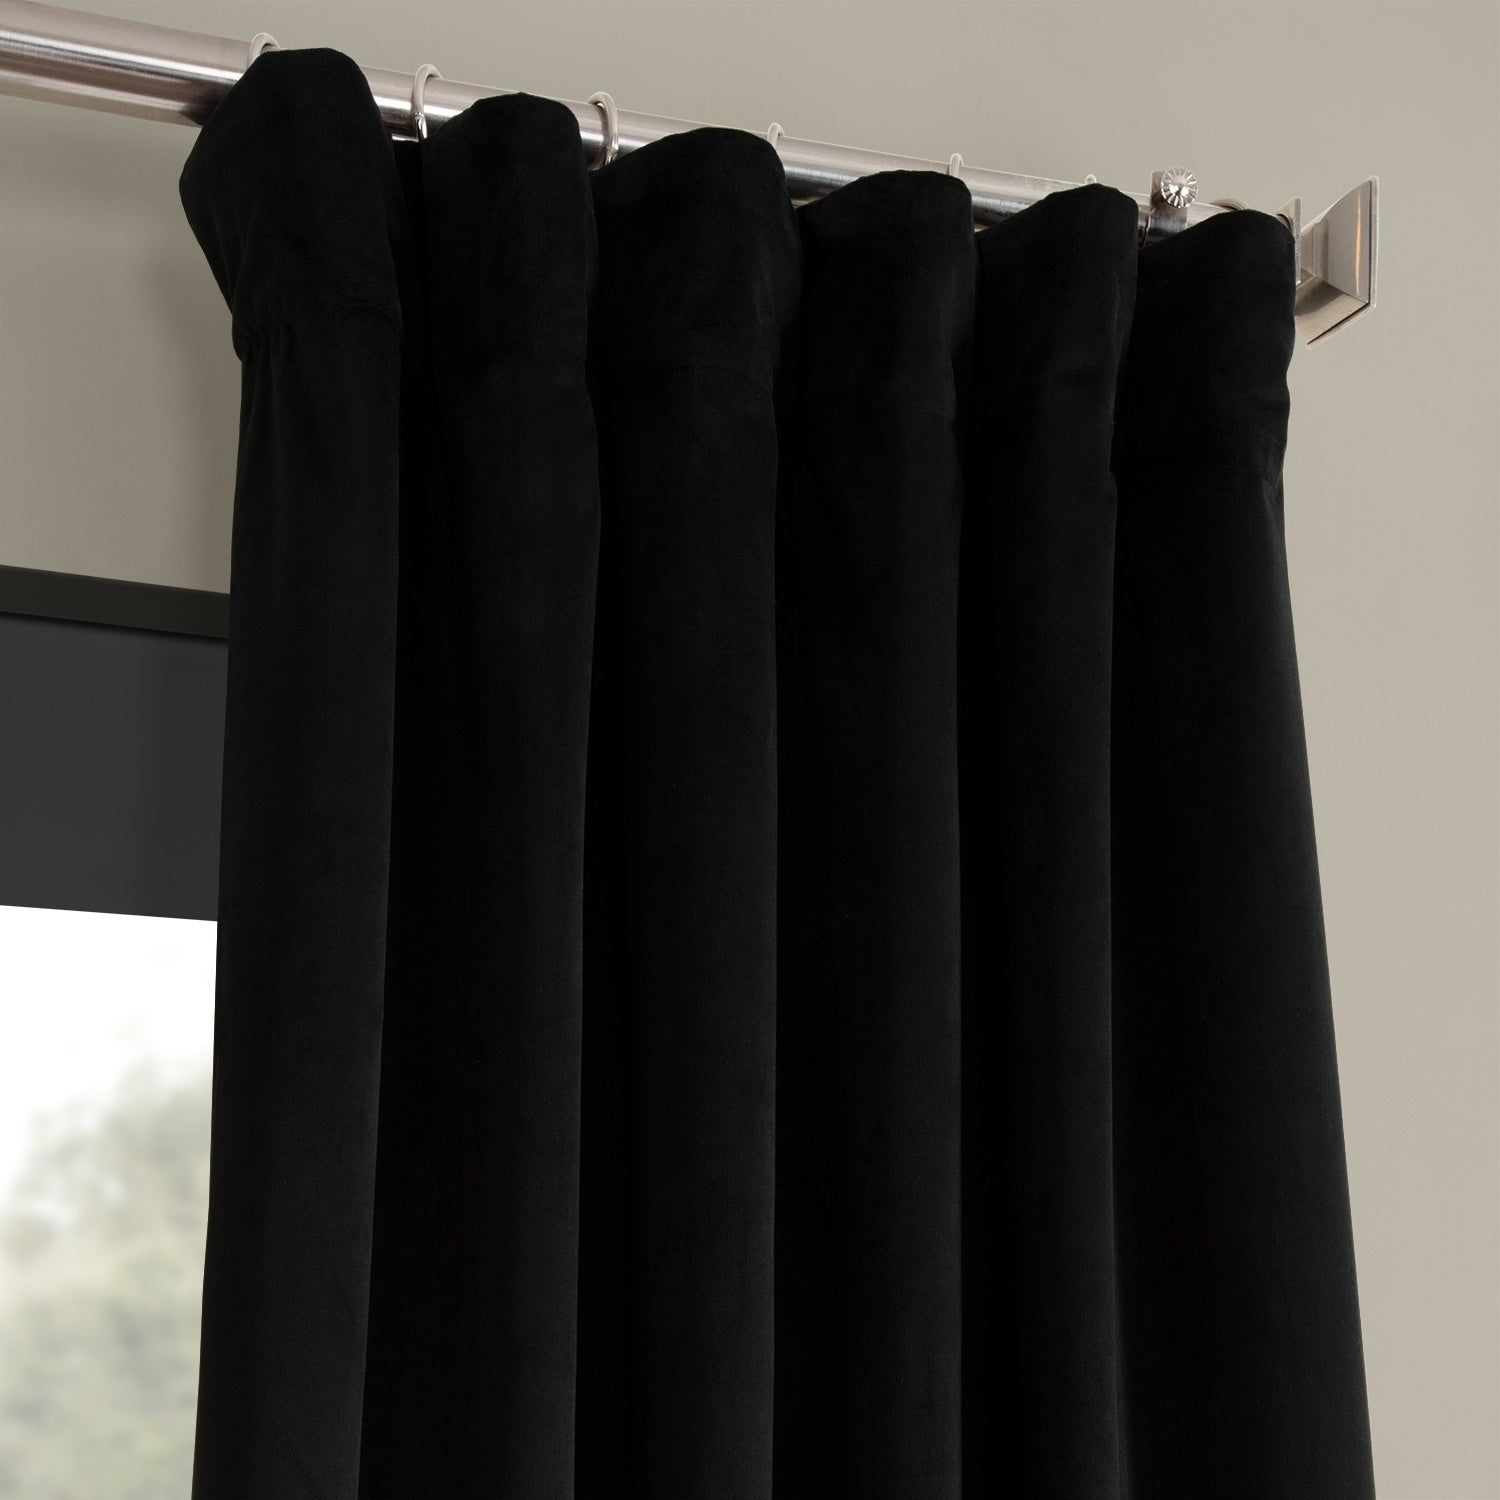 Exclusive Fabrics Signature Warm Black Velvet Single Blackout Curtain Panel Intended For Warm Black Velvet Single Blackout Curtain Panels (Photo 5 of 30)